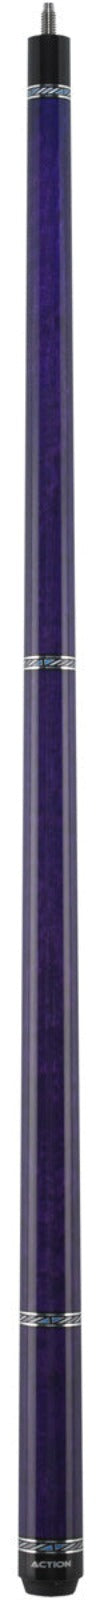 Action Action VAL25 Pool Cue Pool Cue